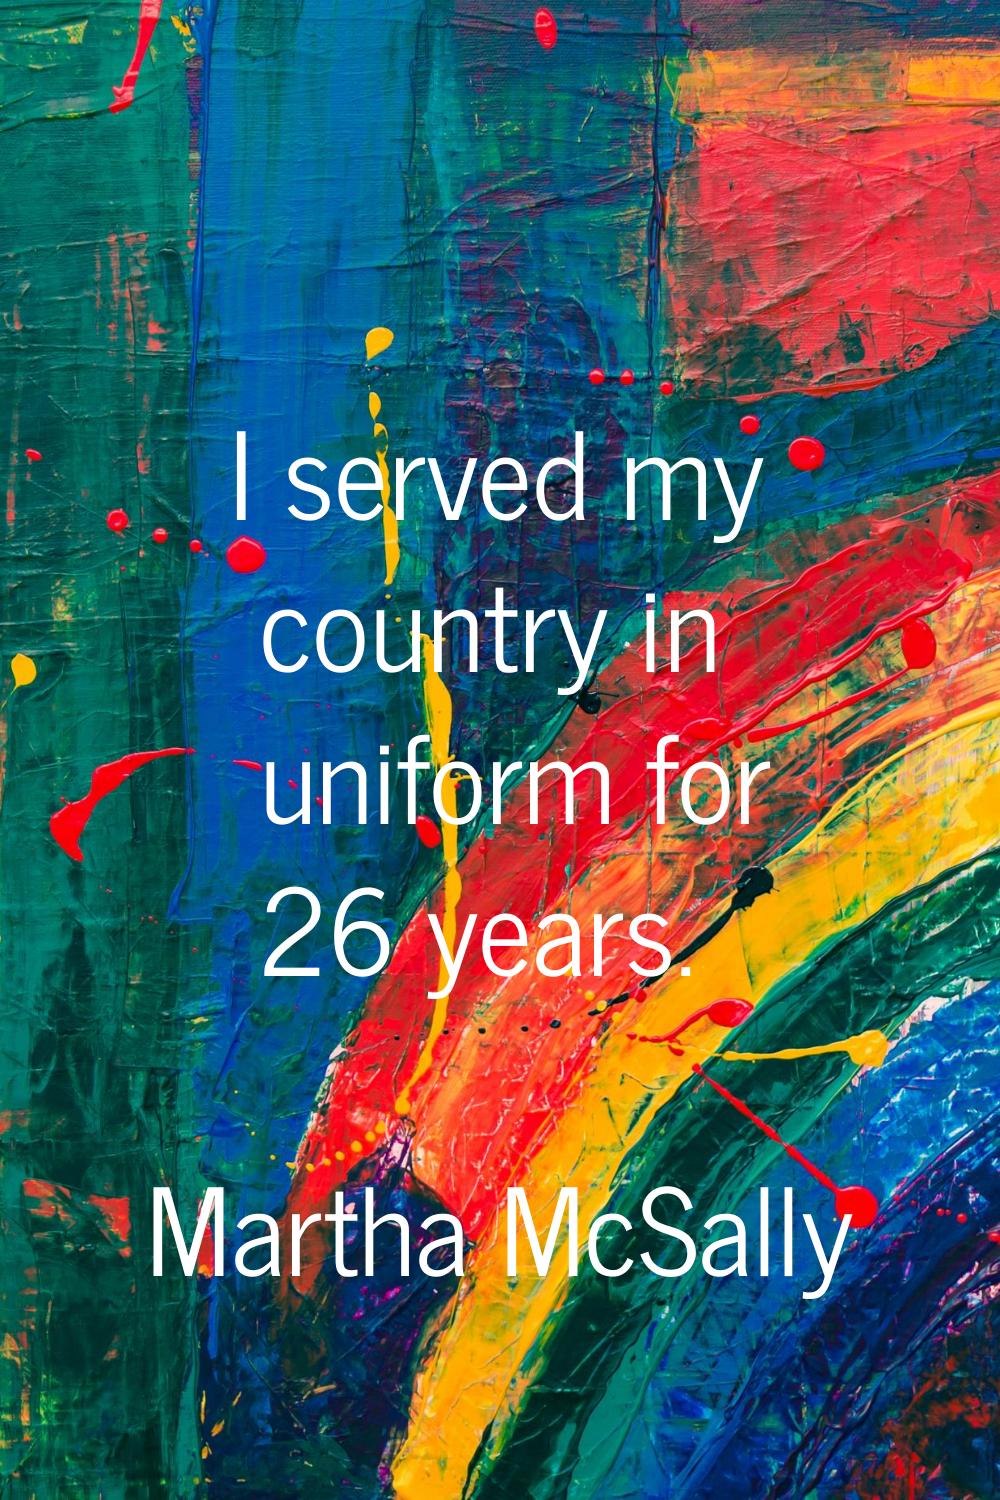 I served my country in uniform for 26 years.